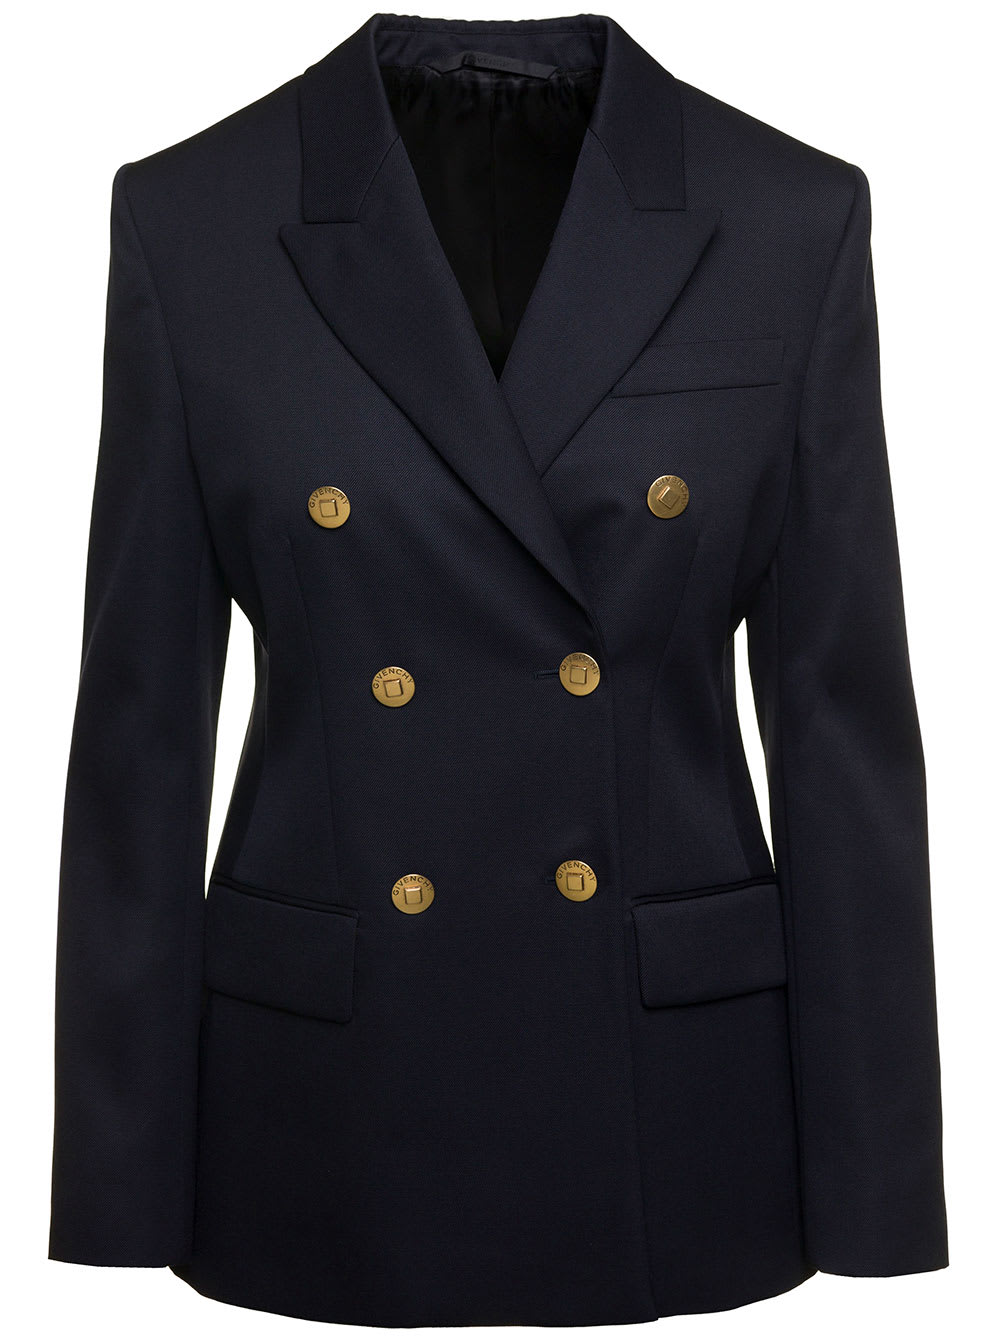 GIVENCHY BLUE DOUBLE-BREASTED JACKET WITH BRANDED BUTTONS IN WOOL BLEND WOMAN